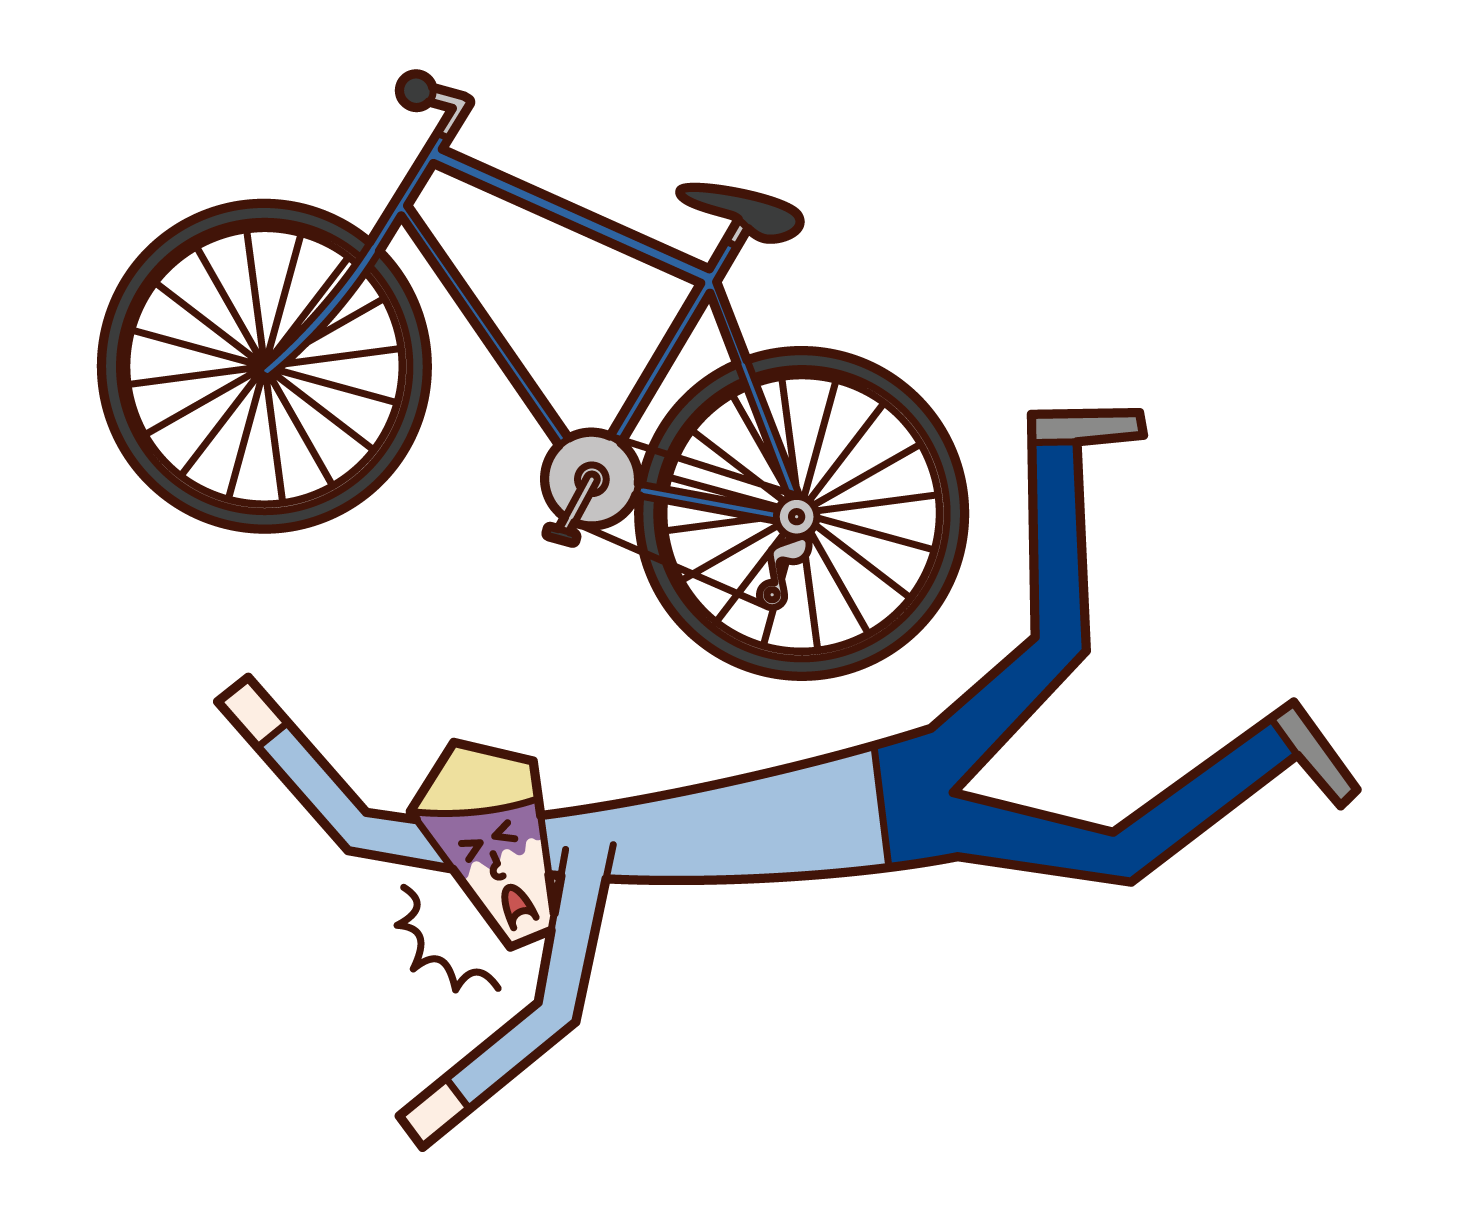 Illustration of a man falling over on a bicycle